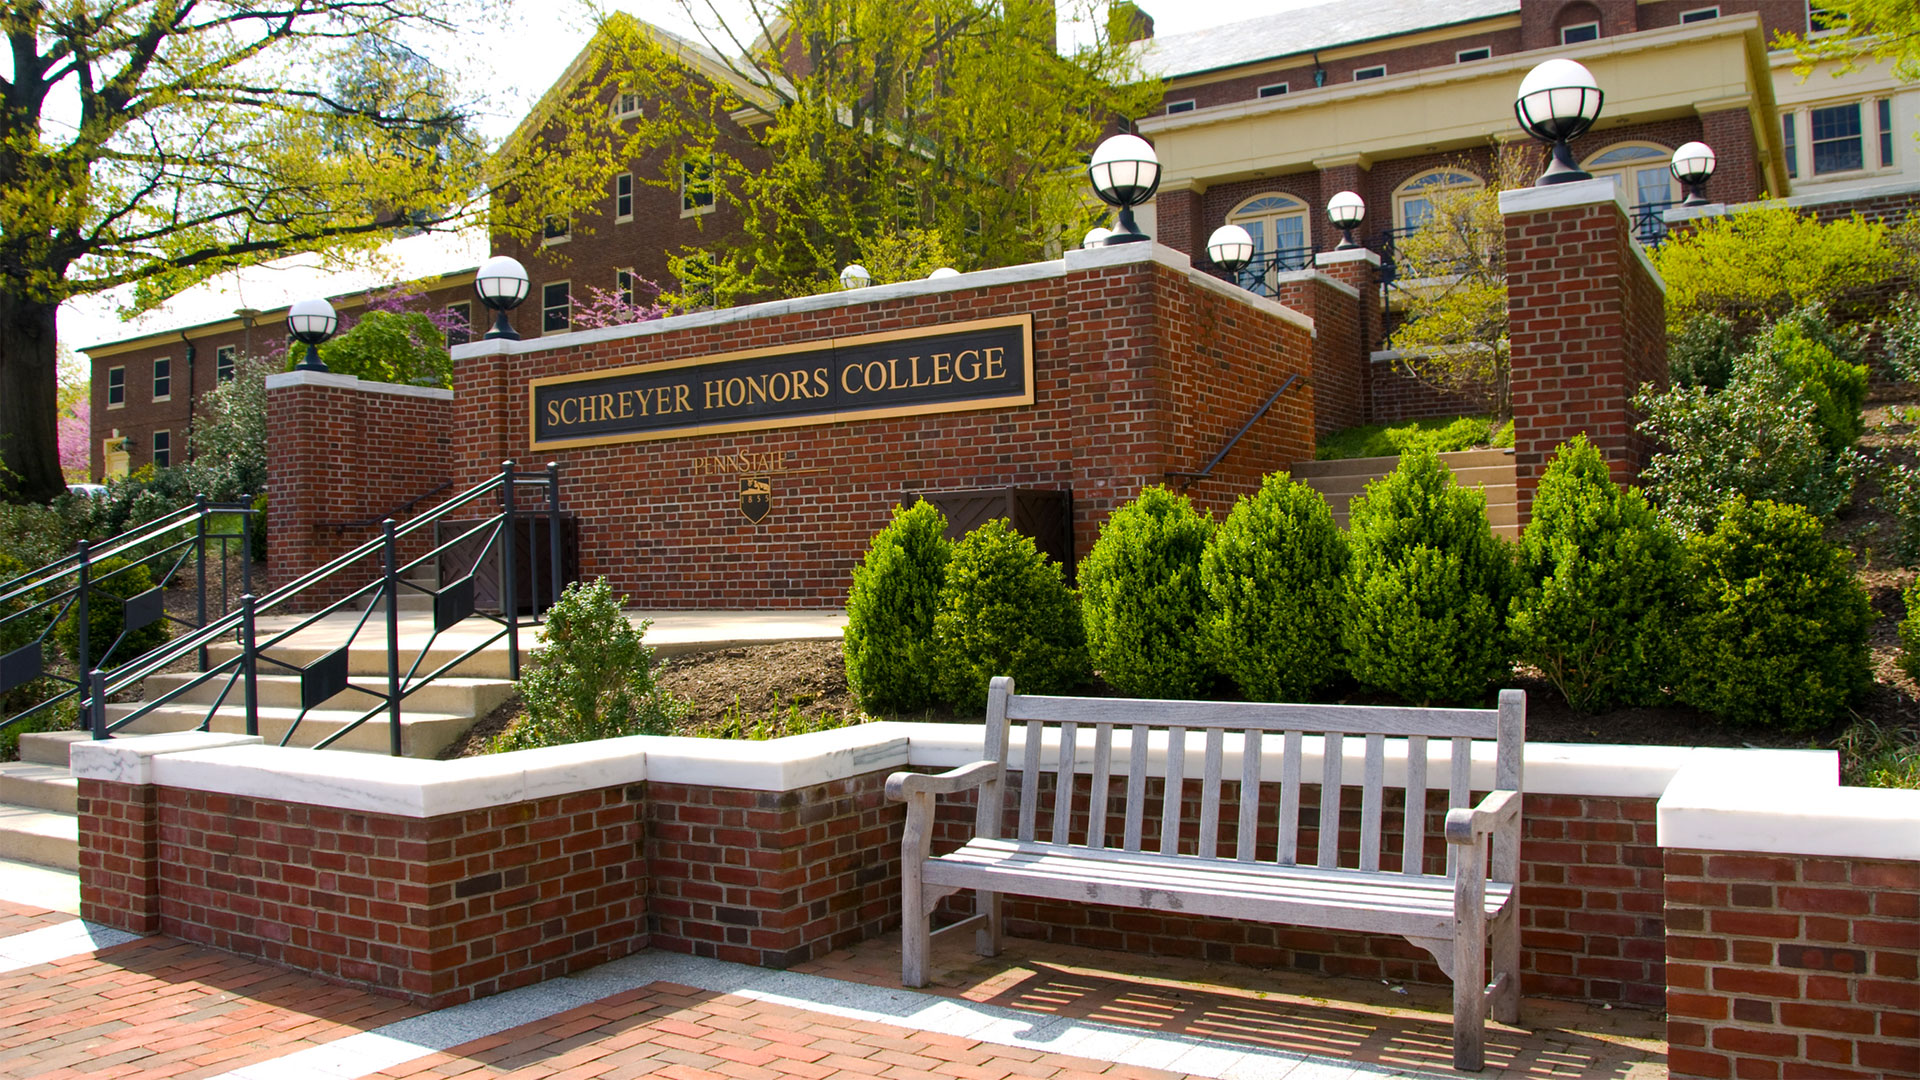 Schreyer Honors College at Atherton Hall